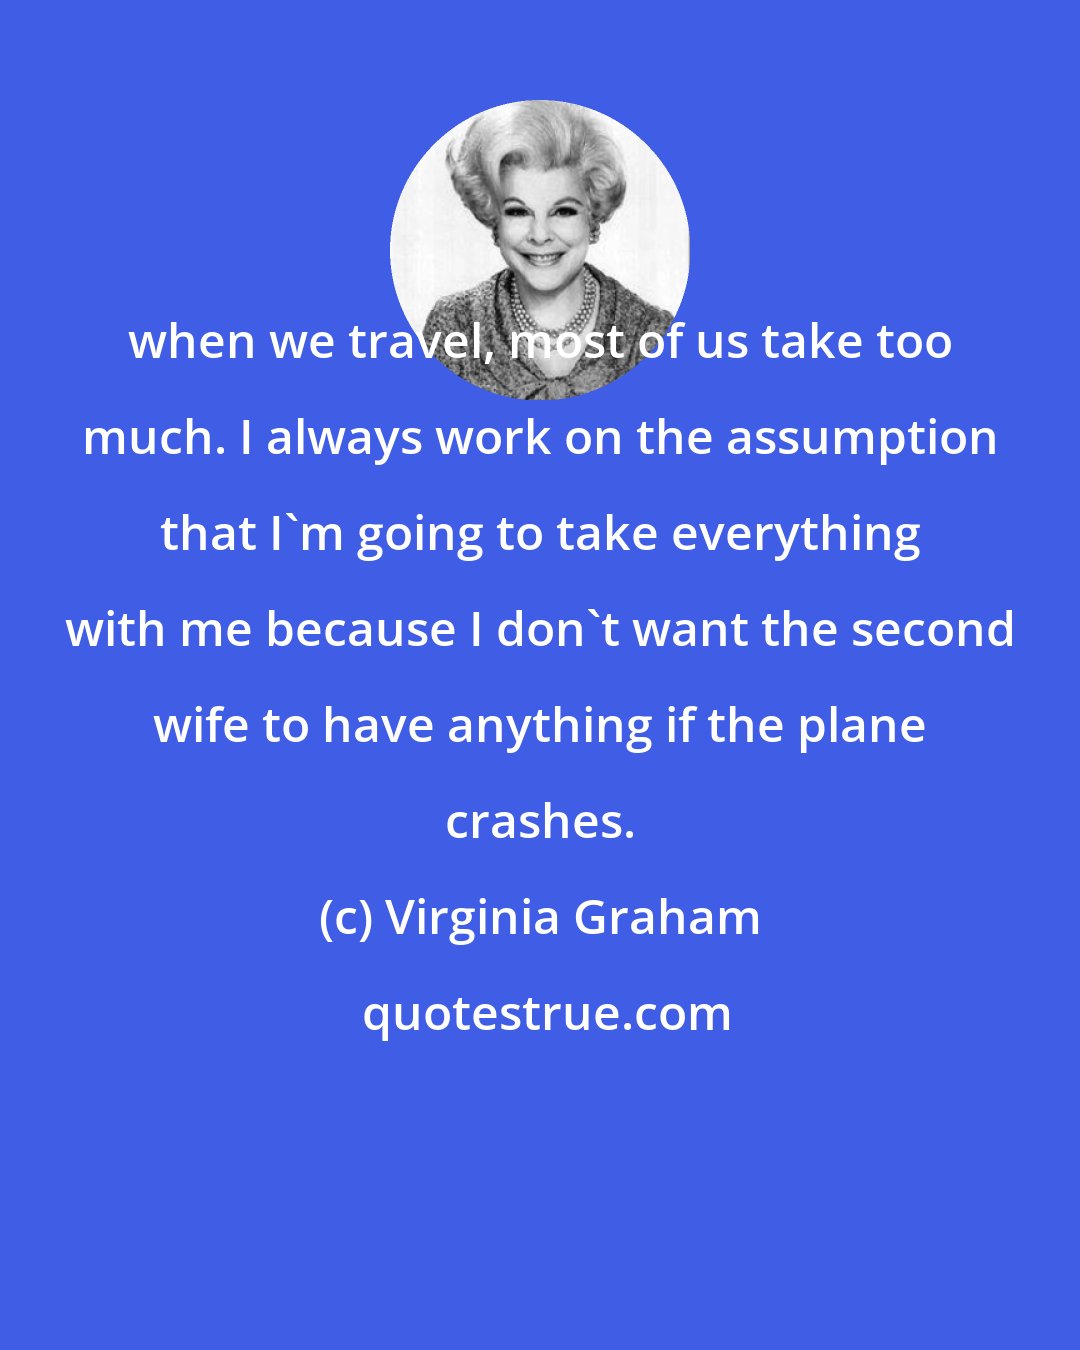 Virginia Graham: when we travel, most of us take too much. I always work on the assumption that I'm going to take everything with me because I don't want the second wife to have anything if the plane crashes.